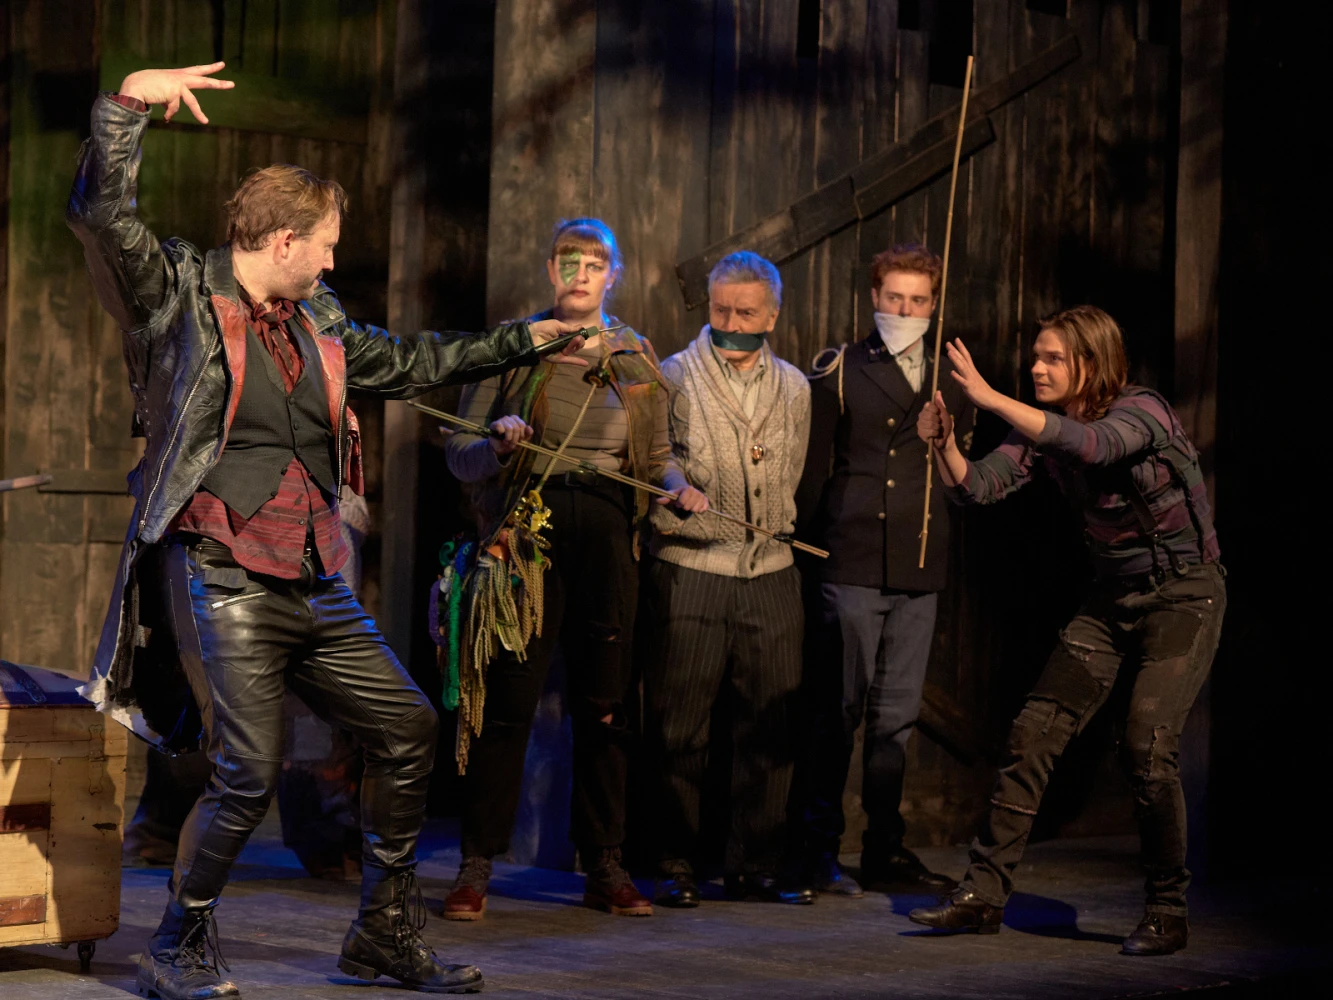 Peter and the Starcatcher: What to expect - 2